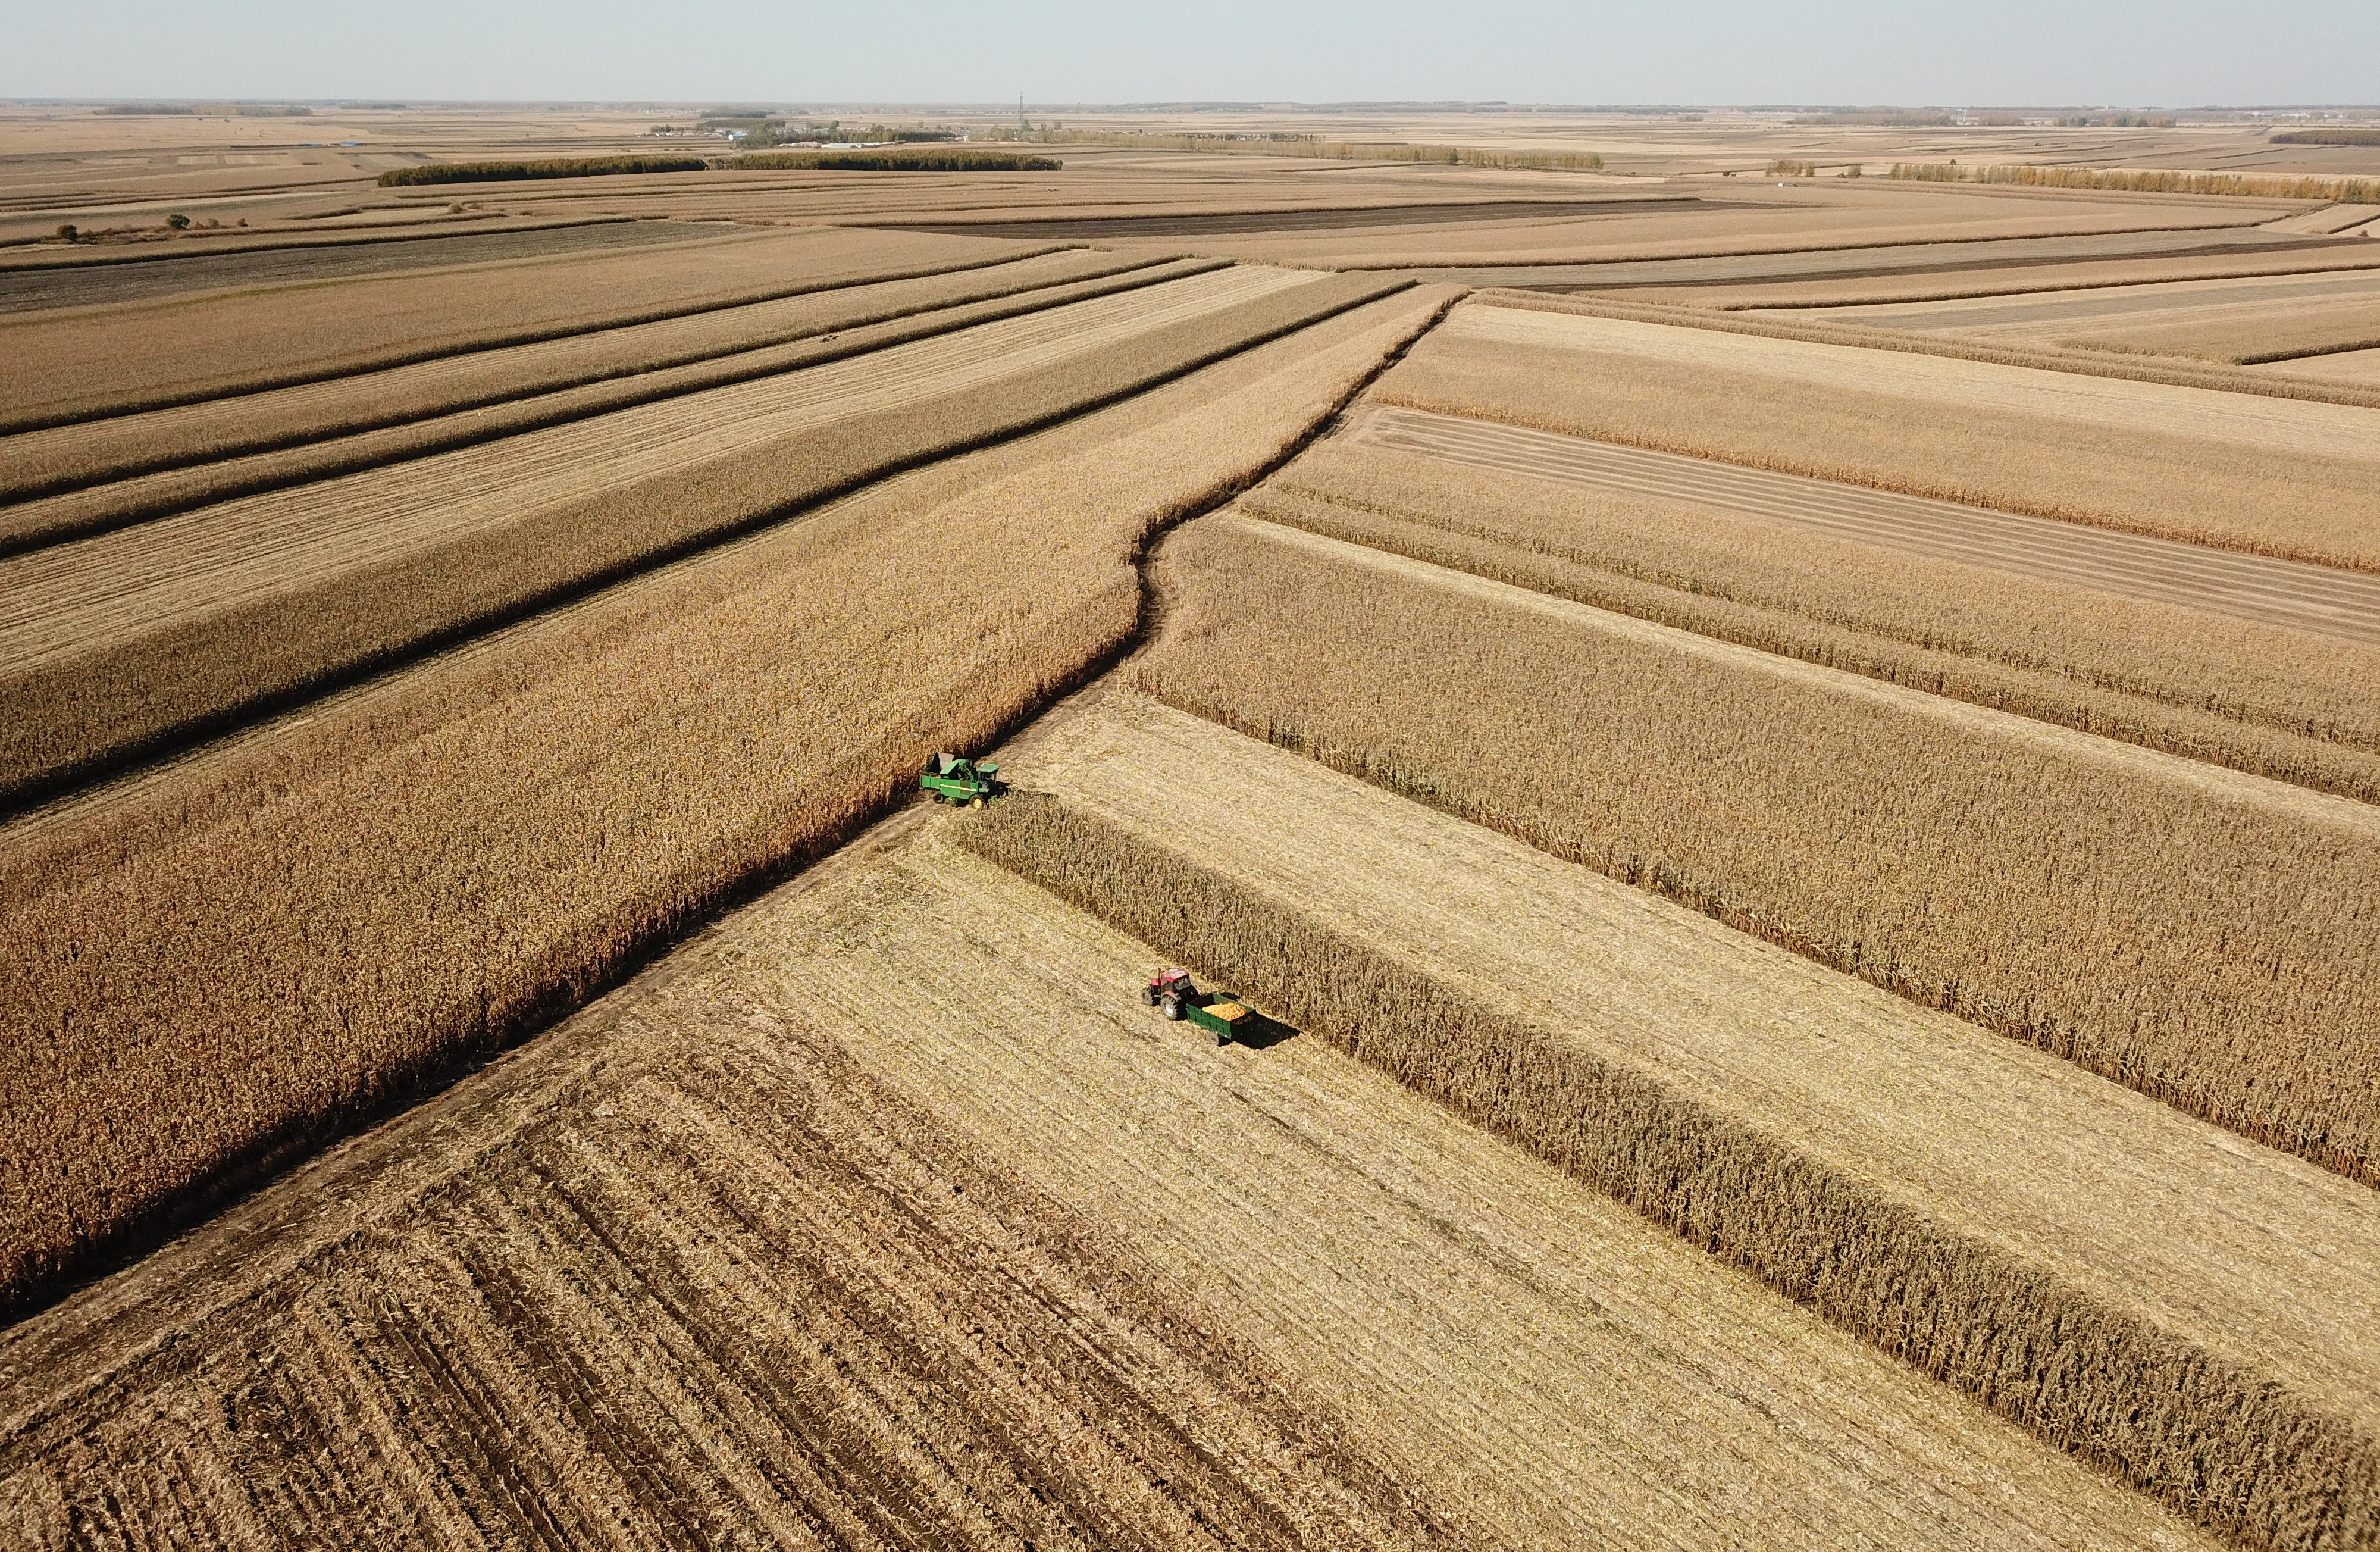 The yield of staple crops like corn is expected to increase substantially with the introduction of GM varieties. Photo: Xinhua